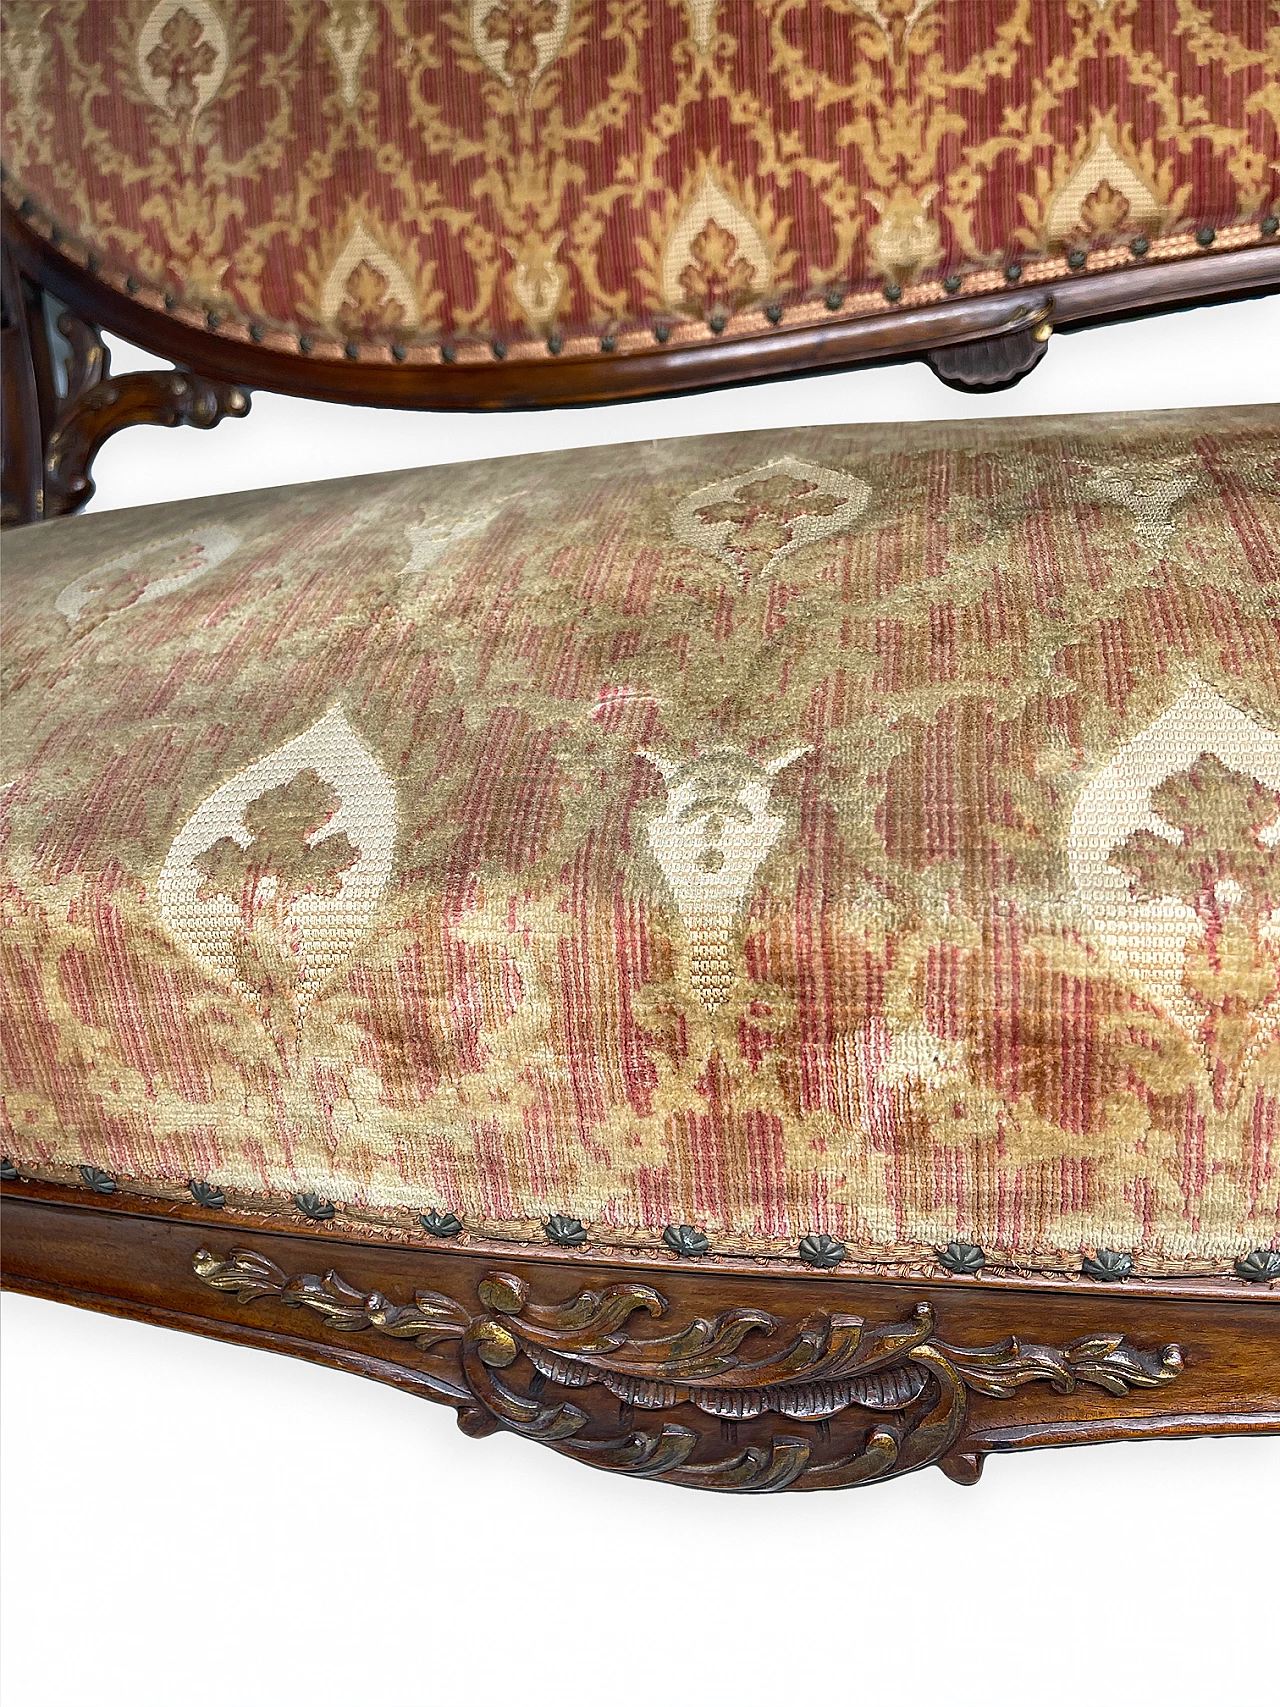 Rocaille-patterned wooden sofa, early 20th century 17